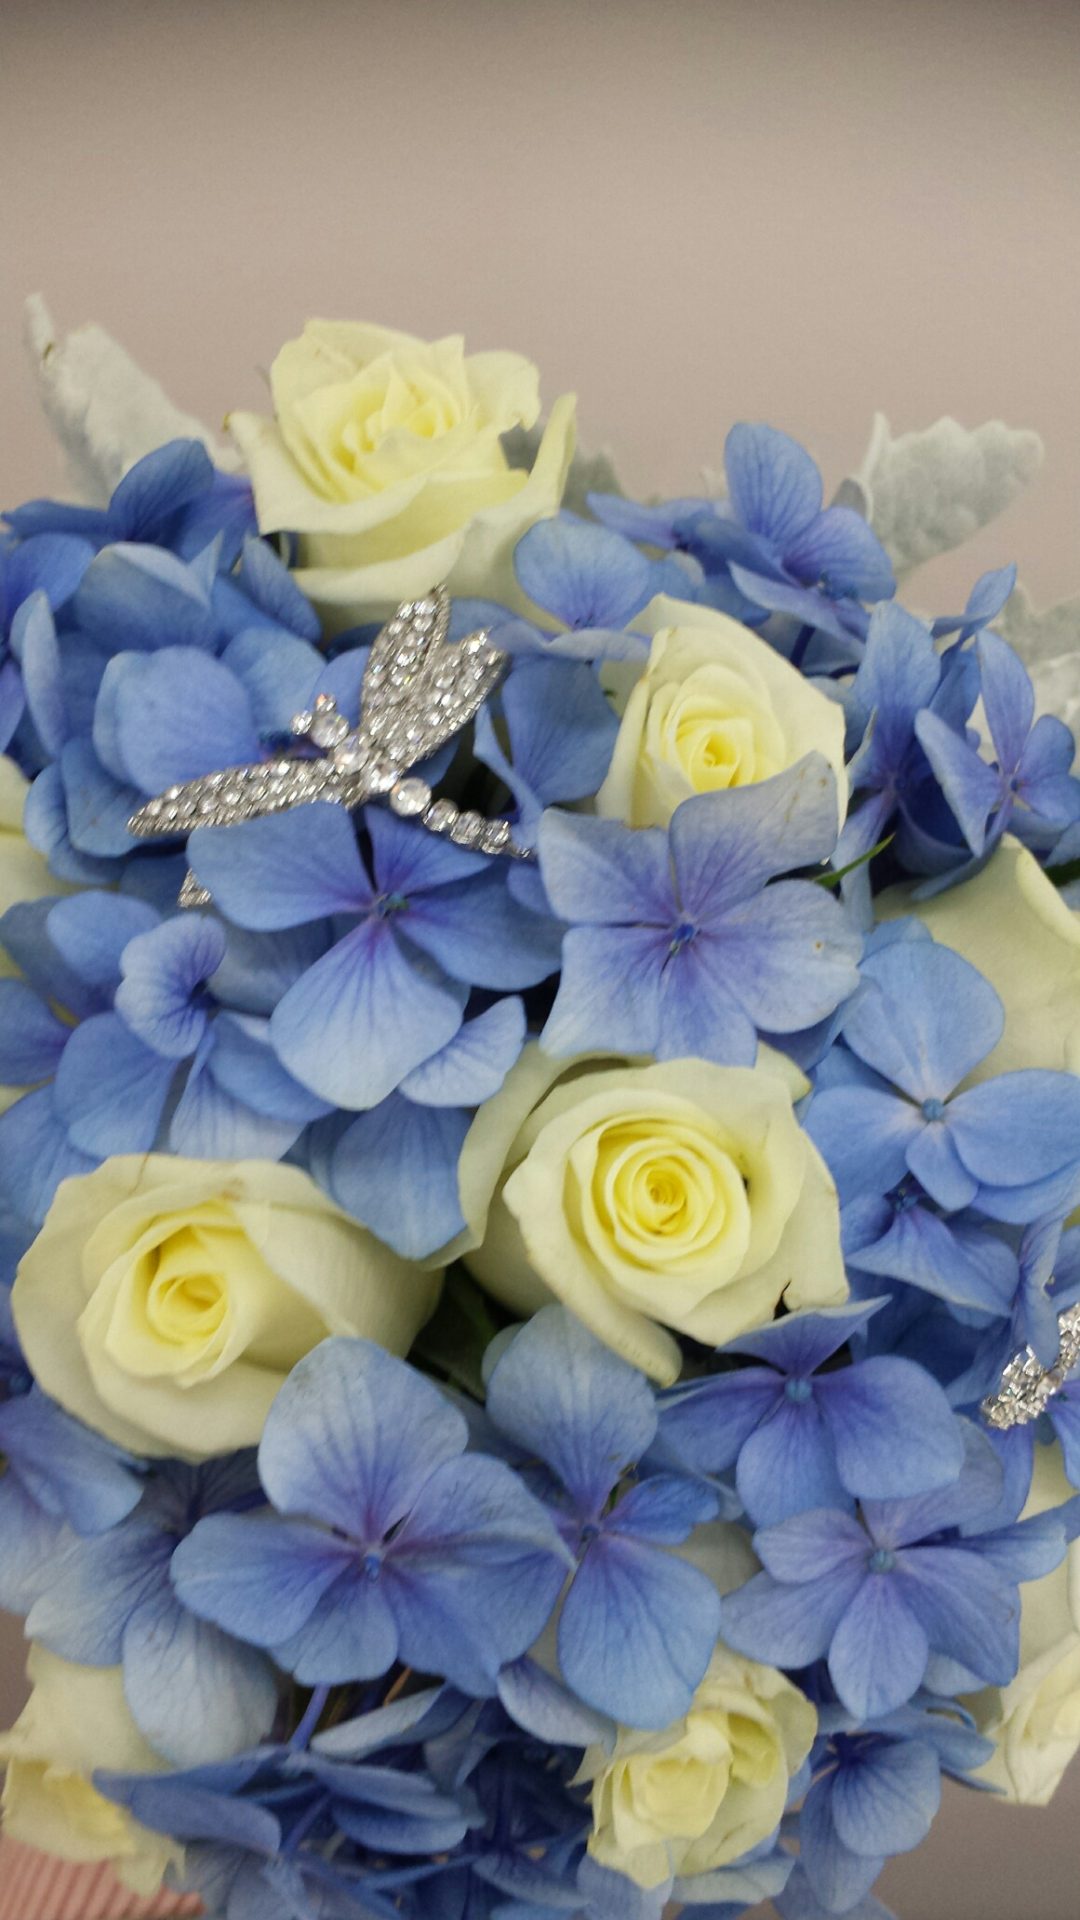 Blue hydrangea and white roses